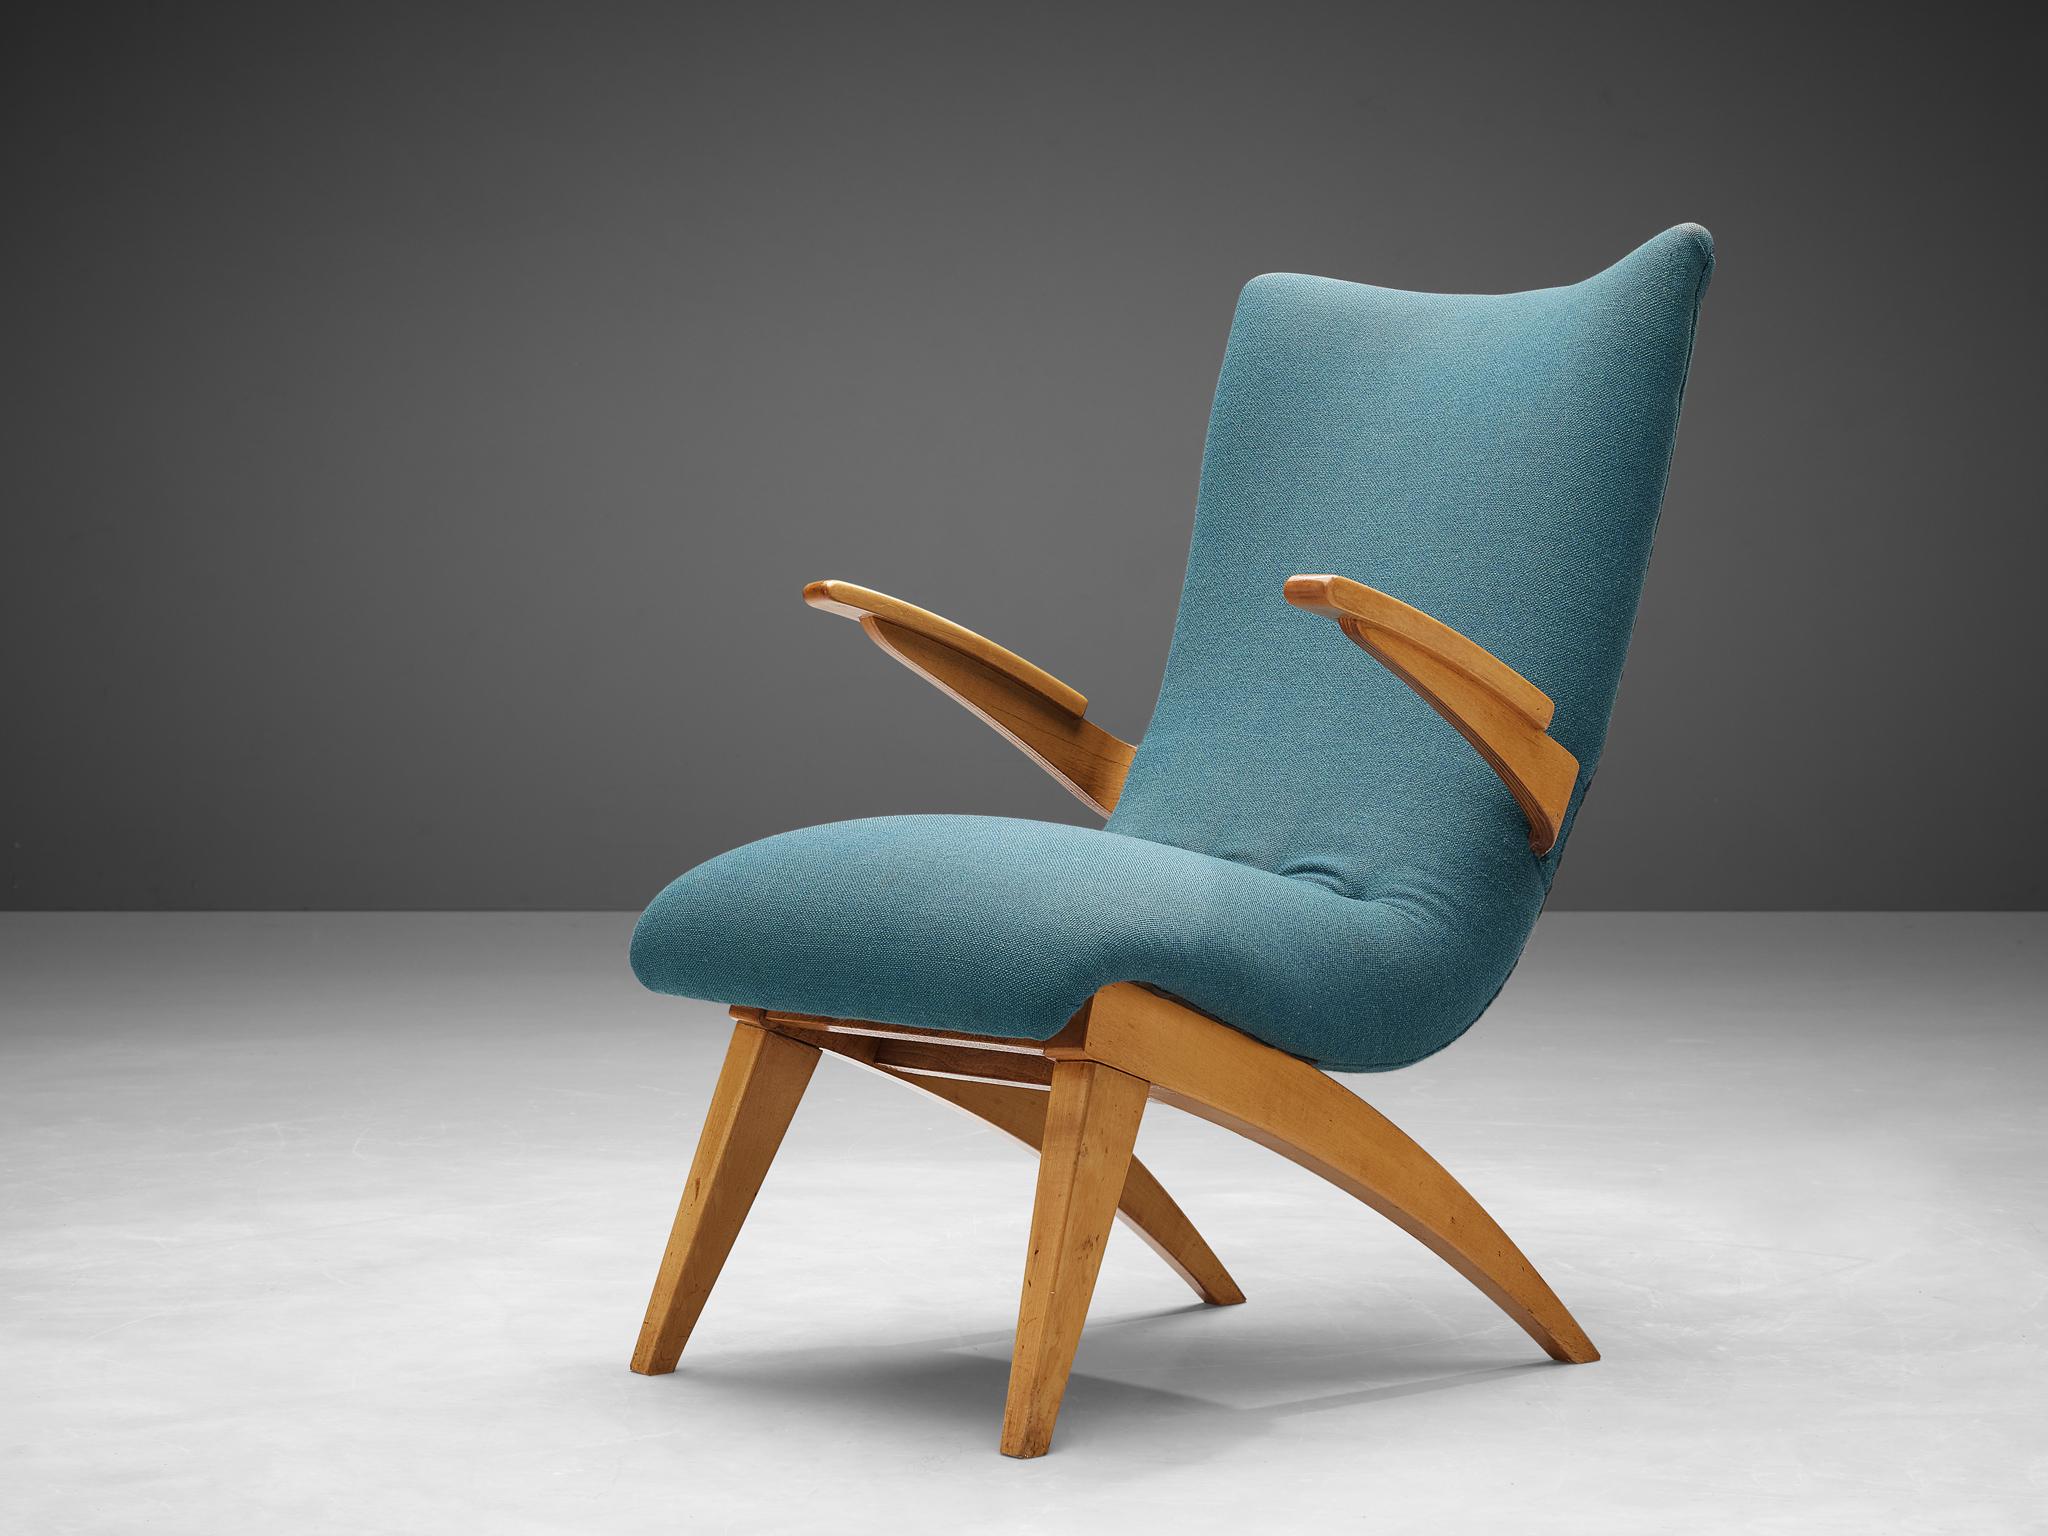 G. Van Os for Van Os Culemborg, lounge chair, beech, fabric, The Netherlands, 1950s

This easy chair is designed by G. Van Os in the Netherlands. The lounge chair, executed in beech and blue fabric upholstery, has a backrest that is tilted in order